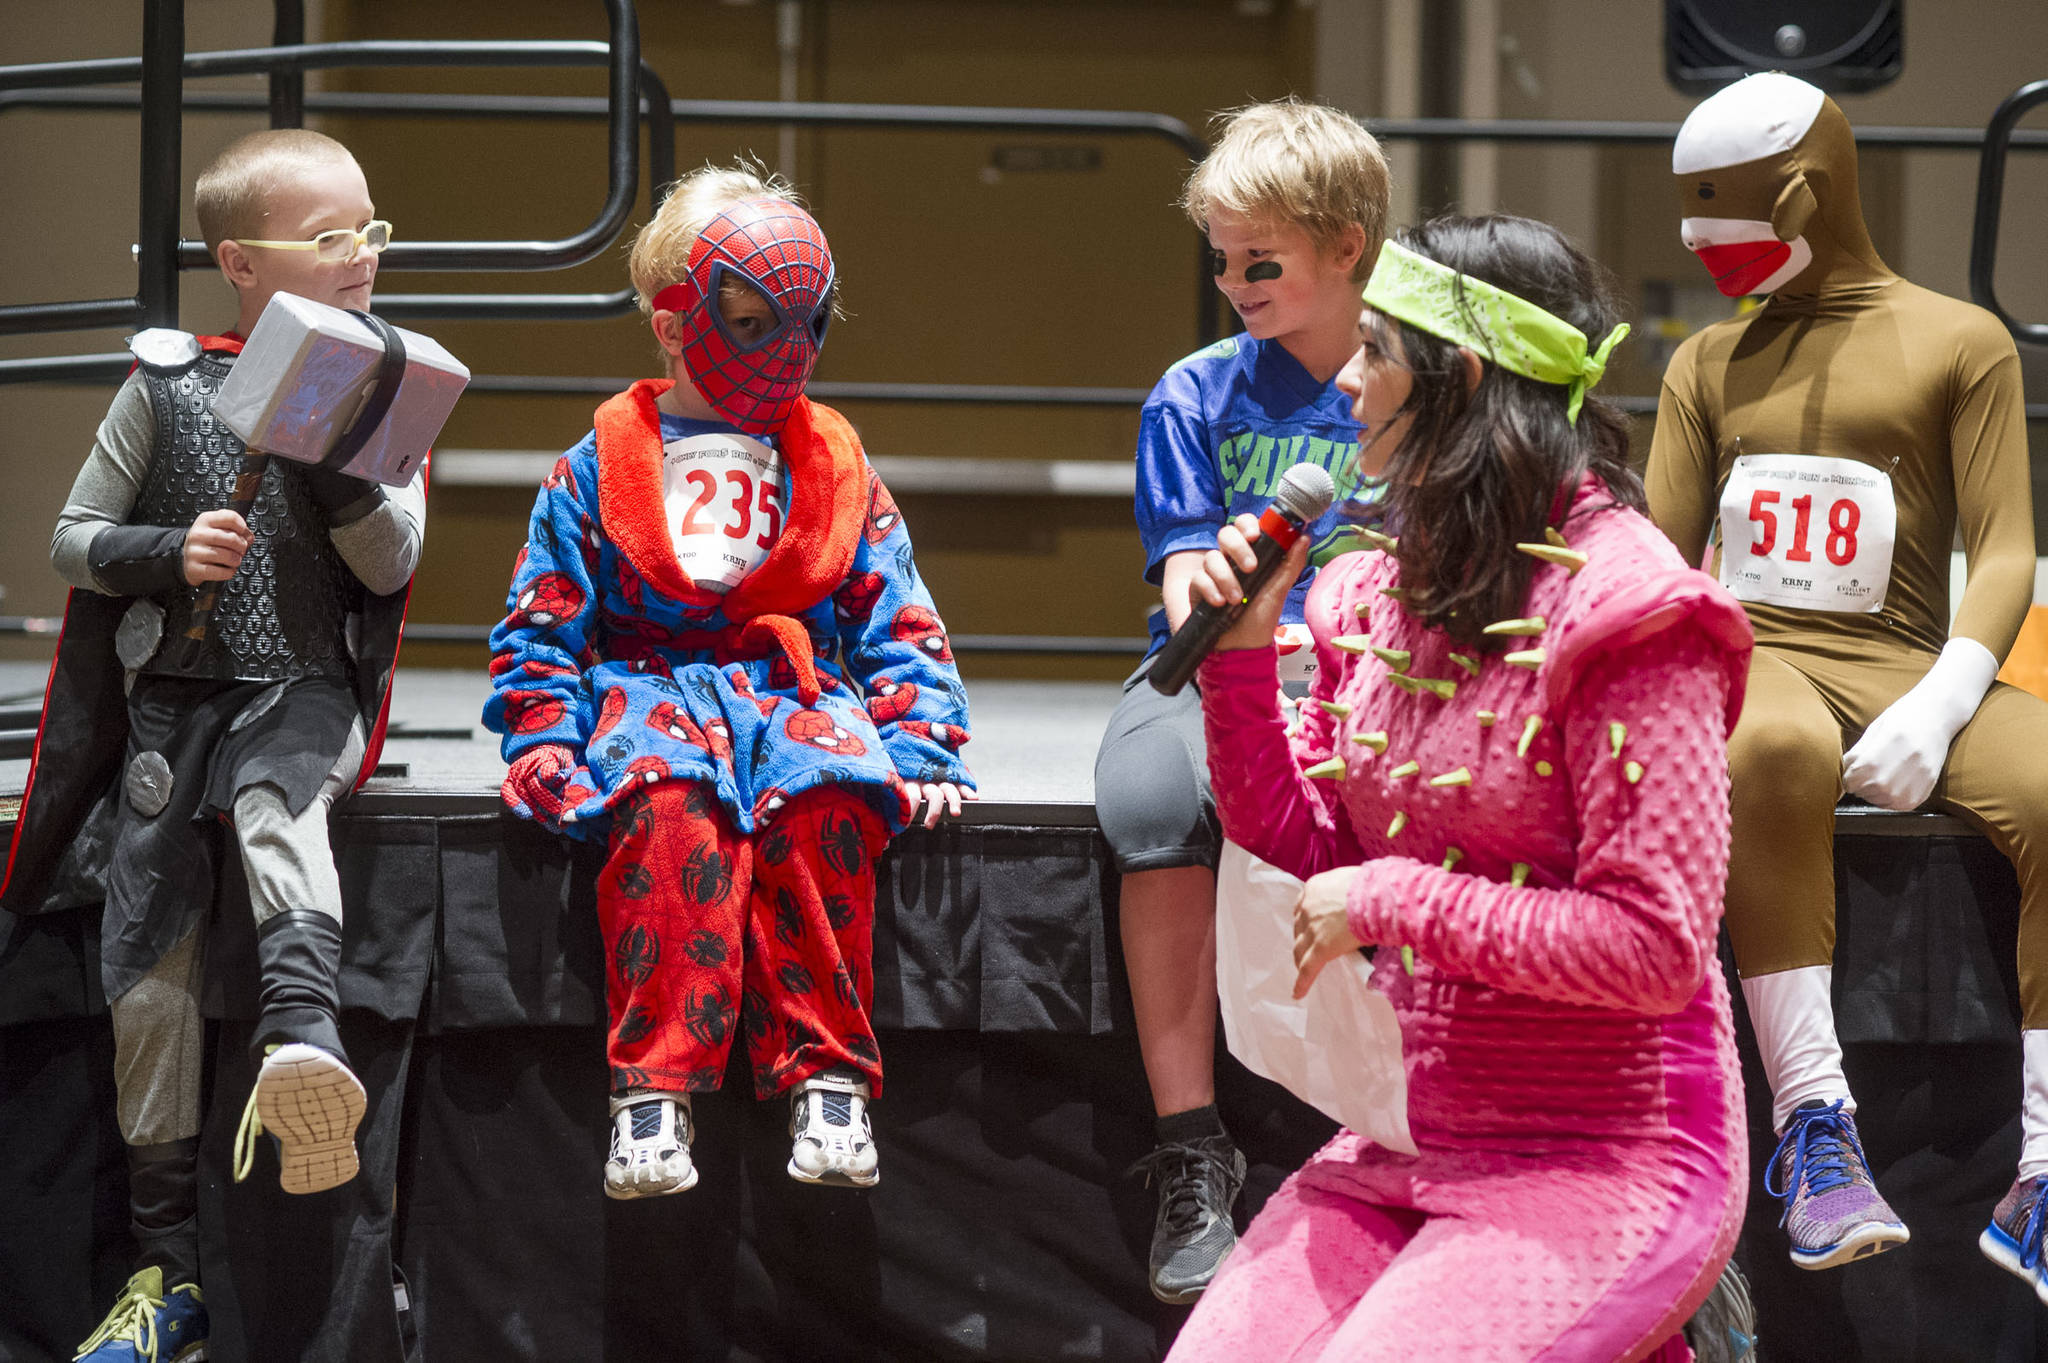 Annie Bartholomew emcees the costume contest before the 2016 Only Fools Run at Midnight Fun Run at Centennial Hall. The race will be housed at the Juneau Arts and Culture Center this year. (Michael Penn | Juneau Empire File)